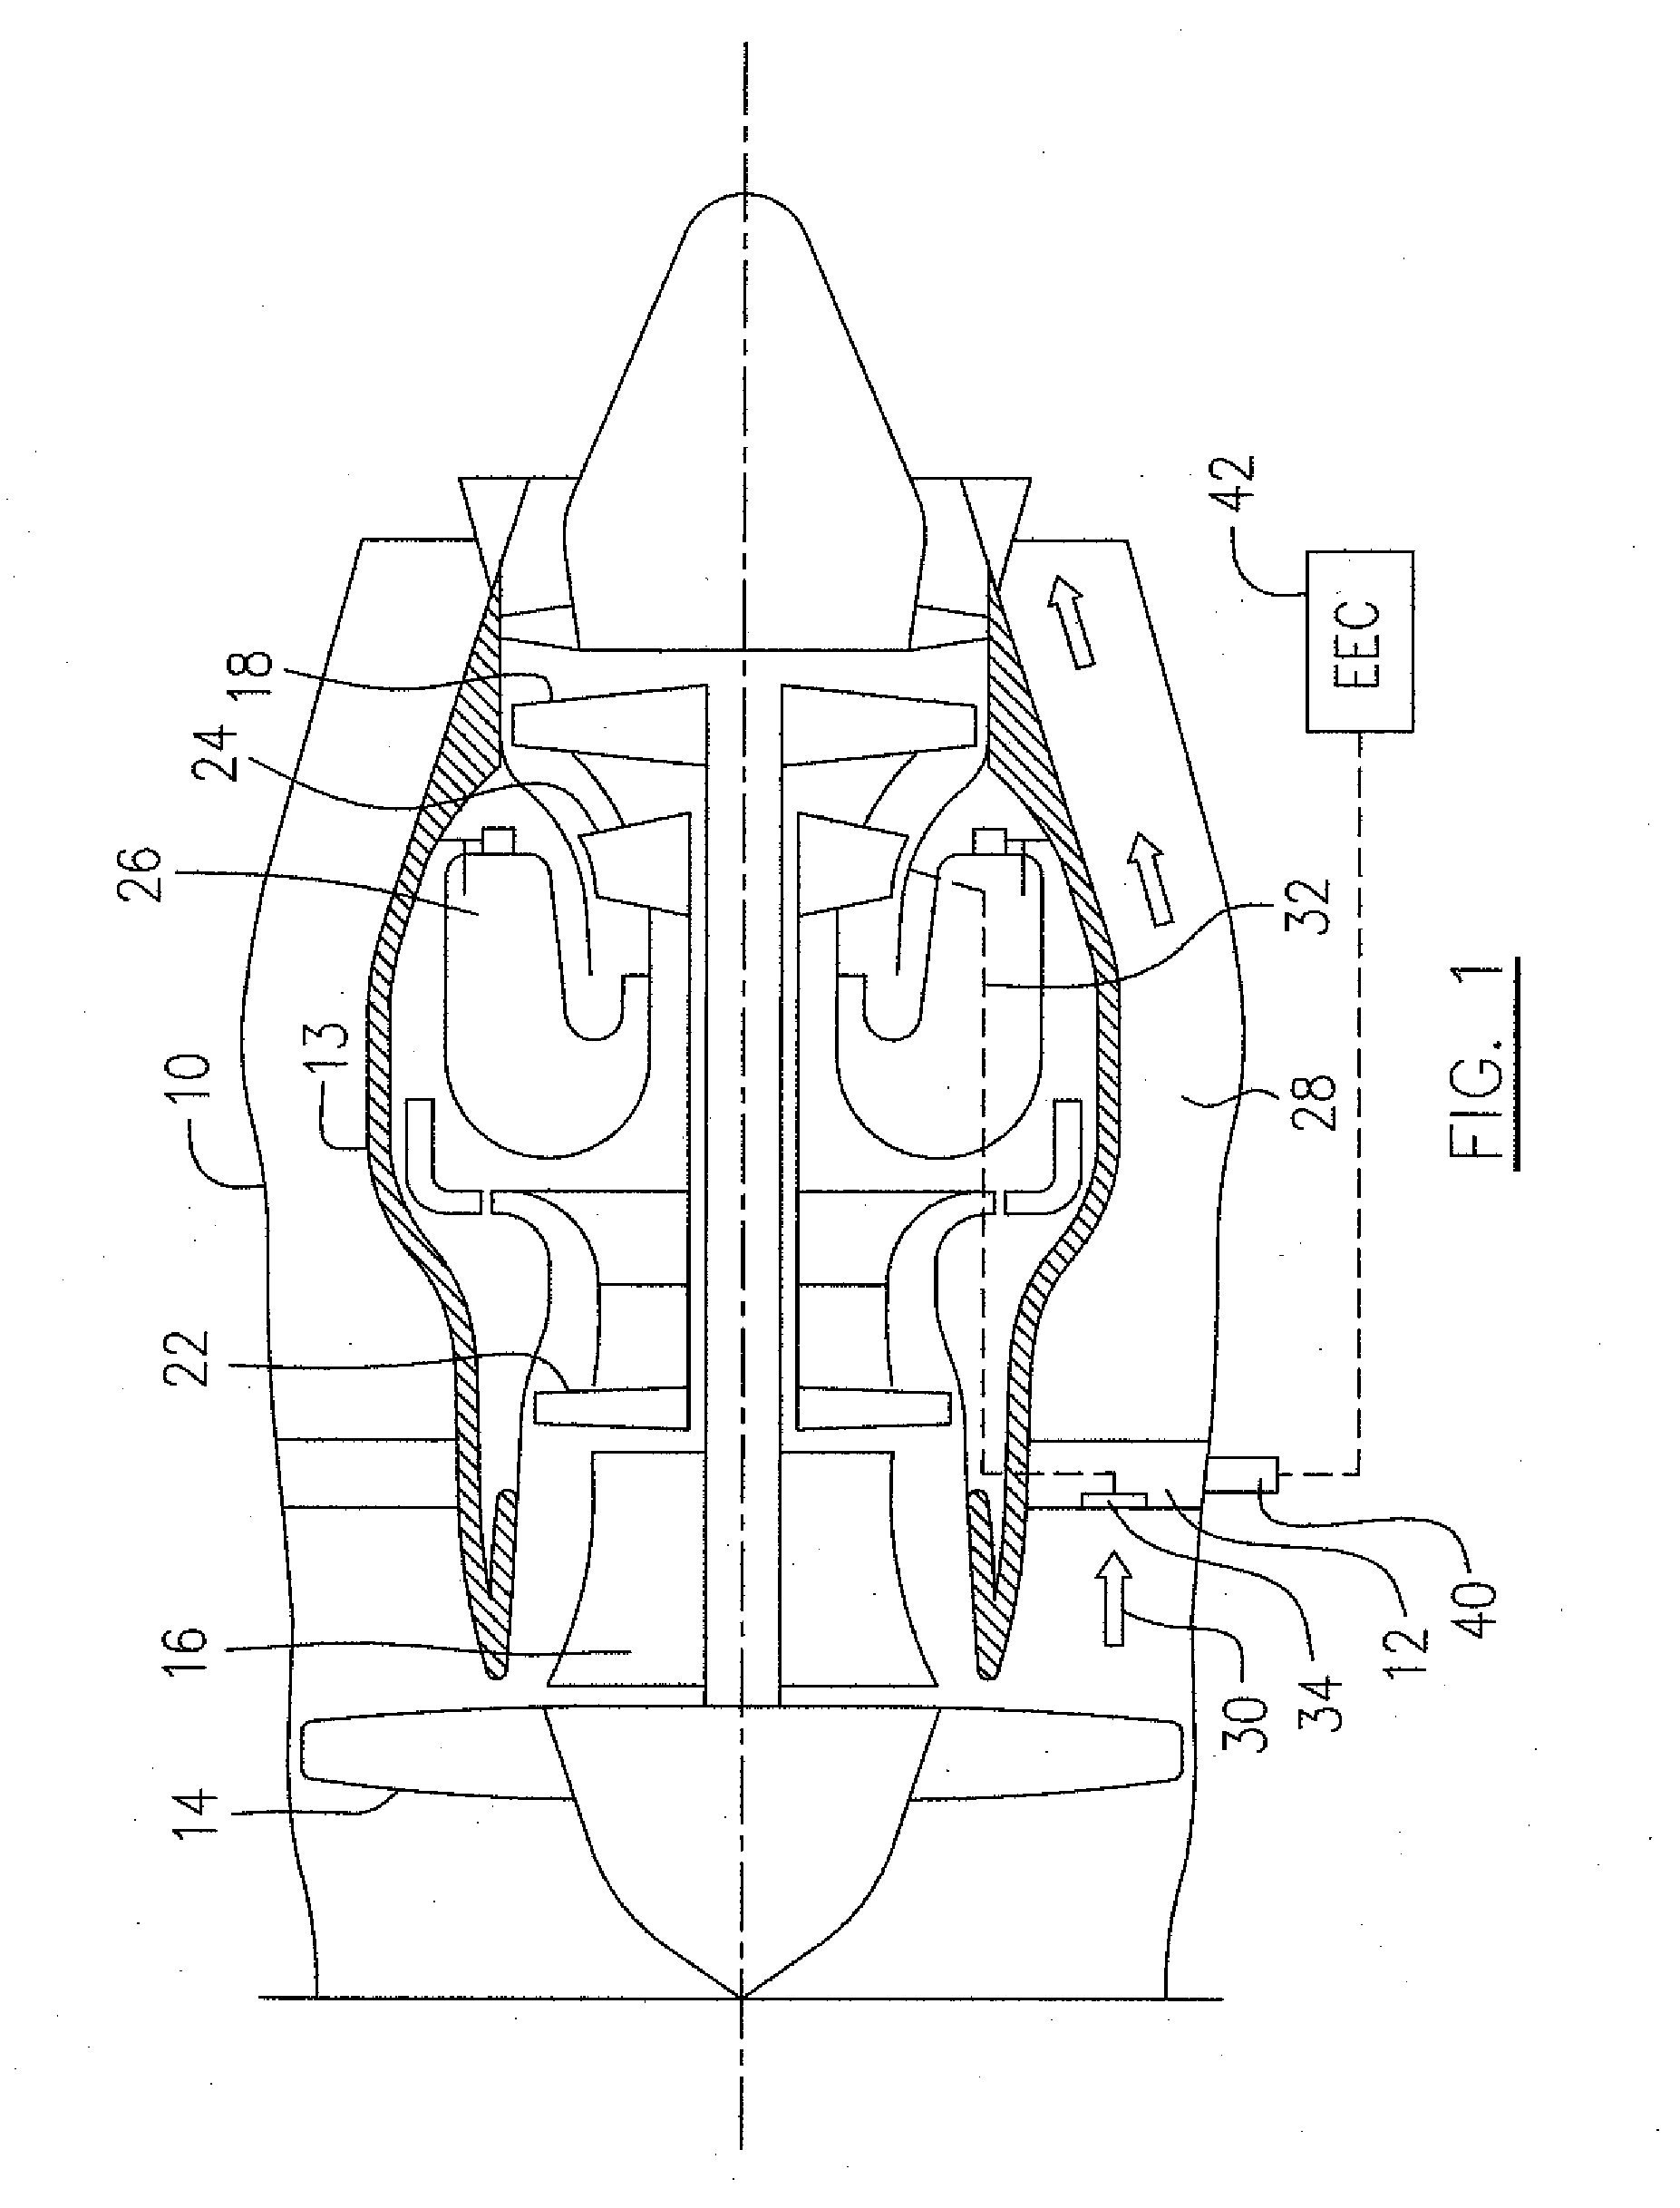 Bypass air scoop for gas turbine engine